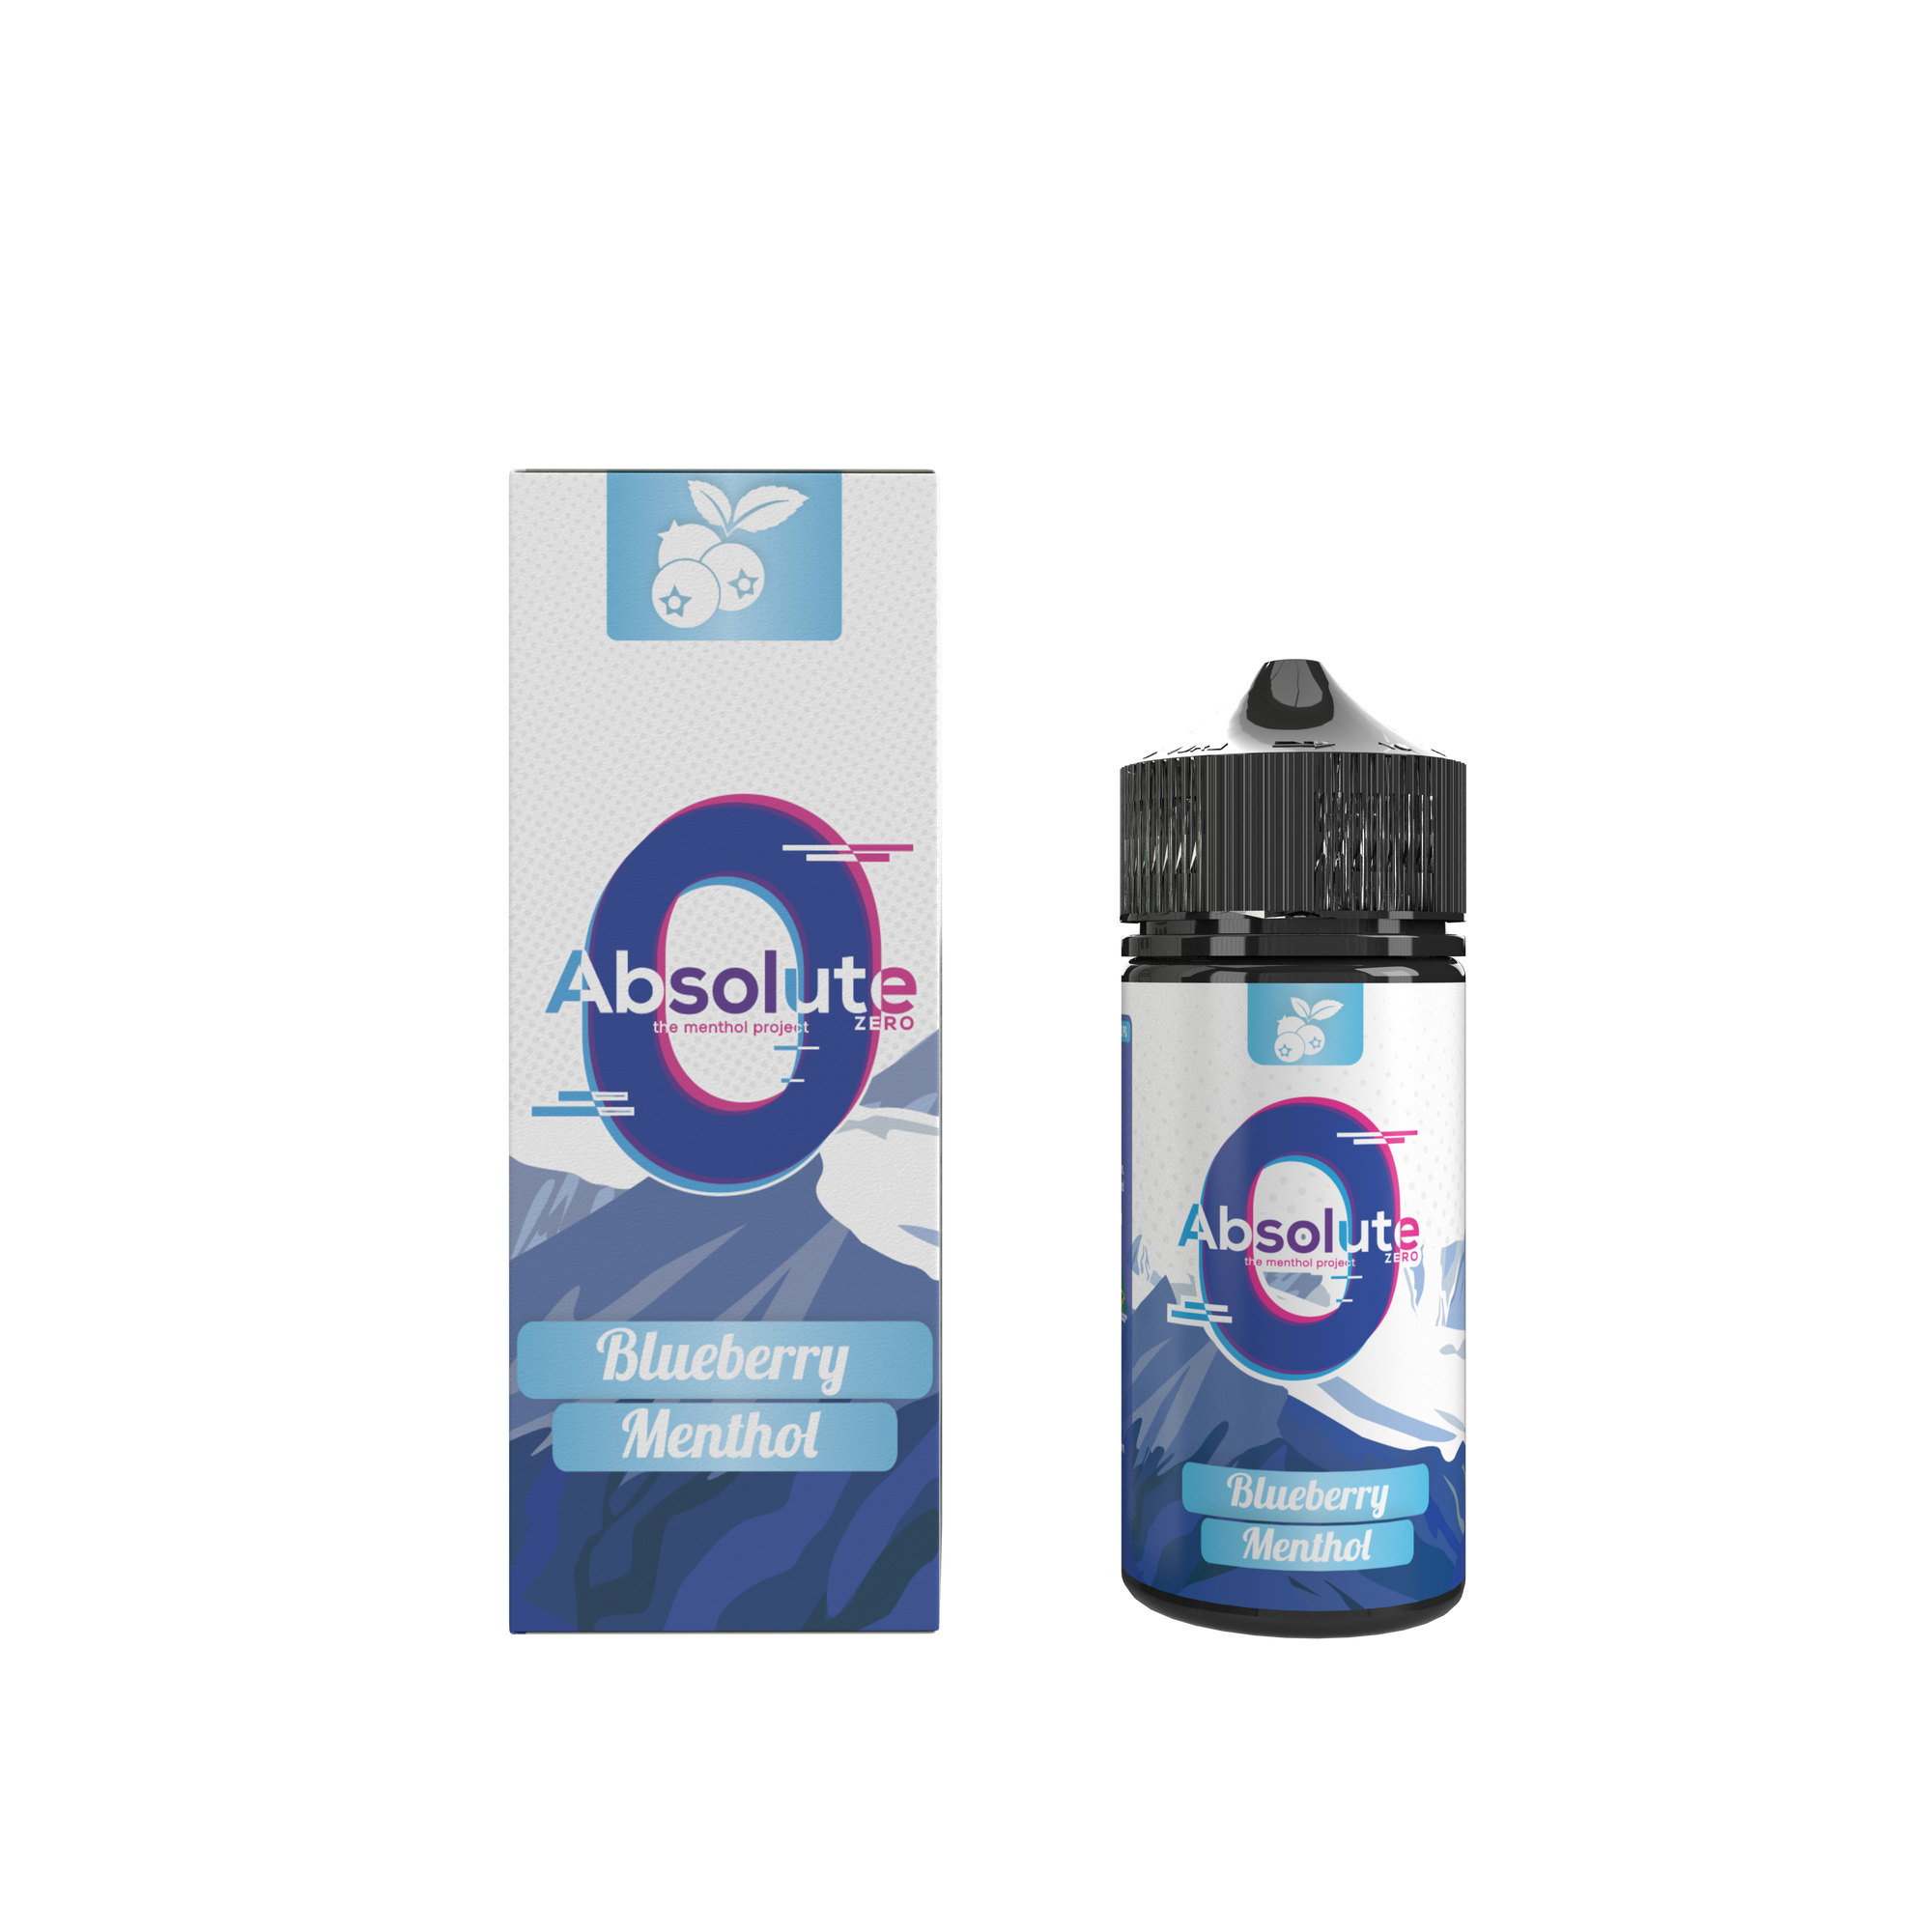 Buy Absolute Zero Blueberry Menthol - Wick and Wire Co Melbourne Vape Shop, Victoria Australia